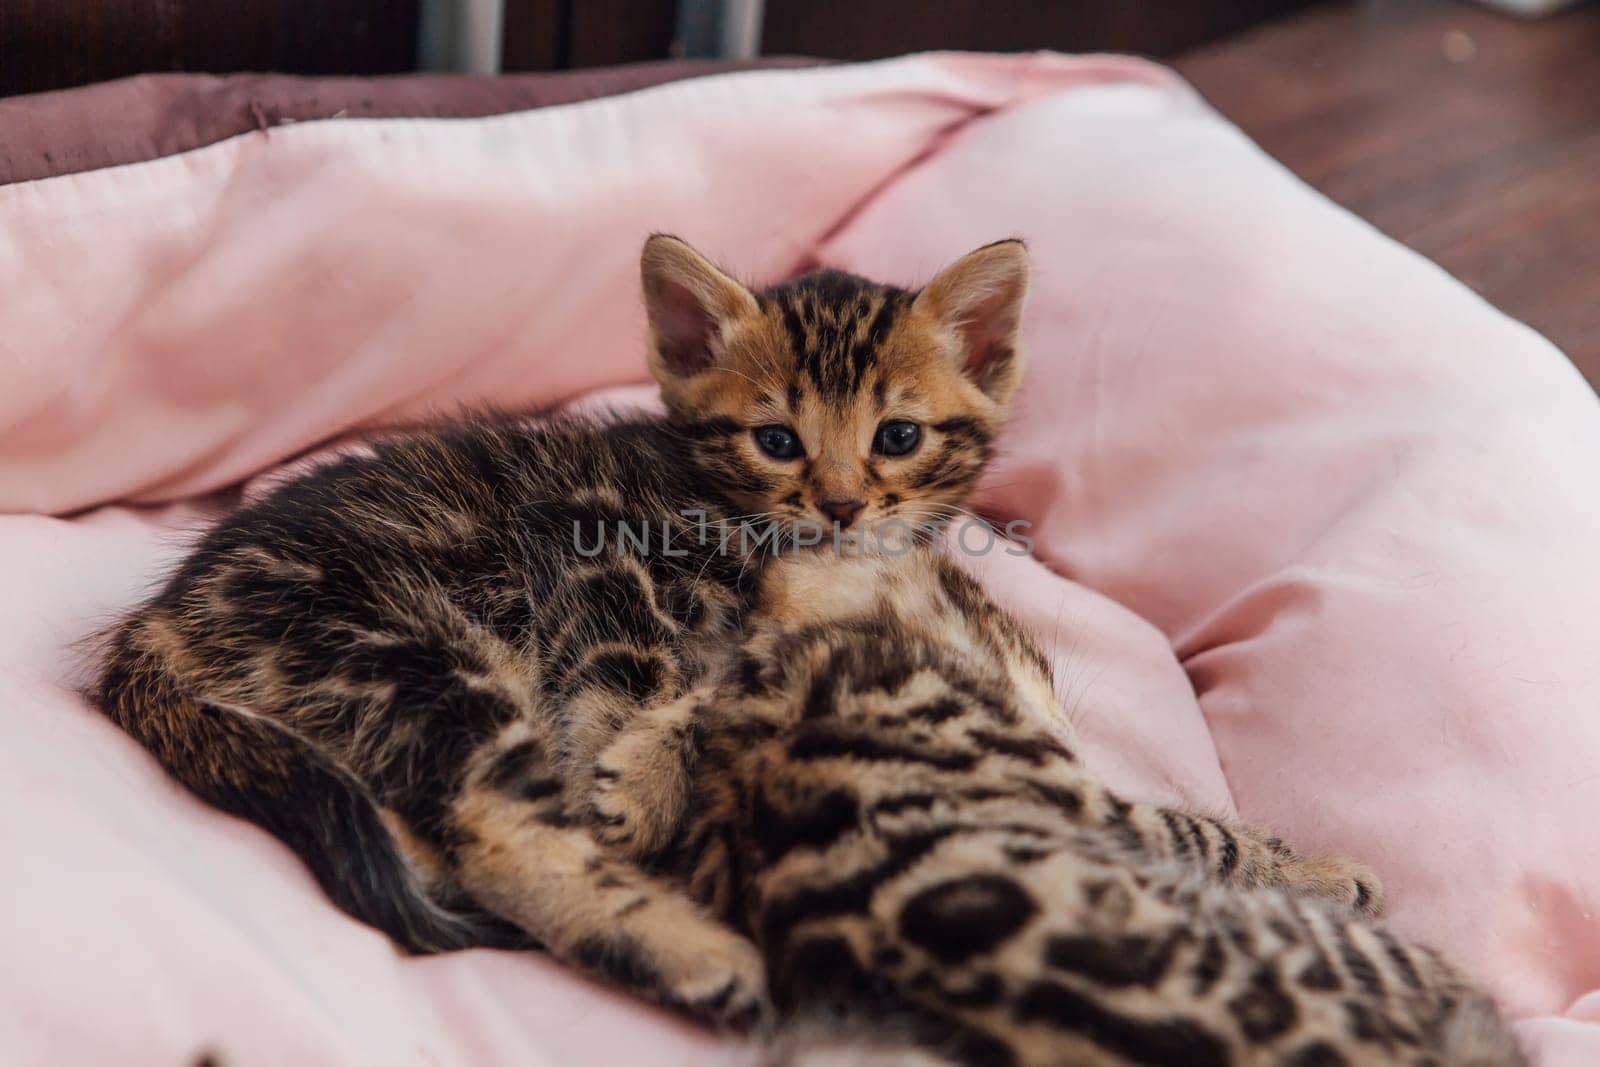 Close-up little bengal kittens on the cat's pillow by Smile19